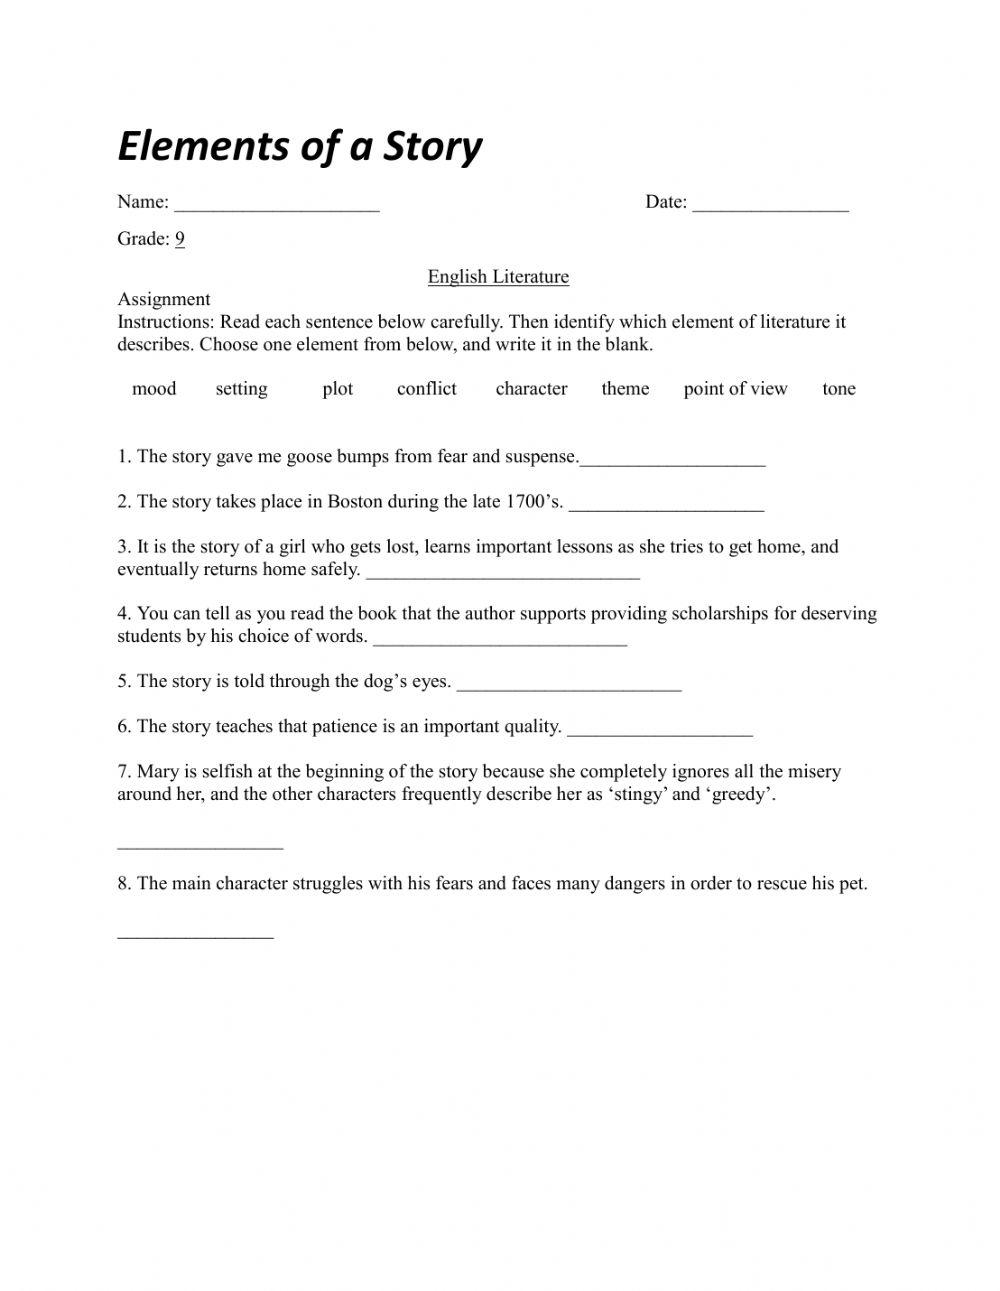 Elements of a Story